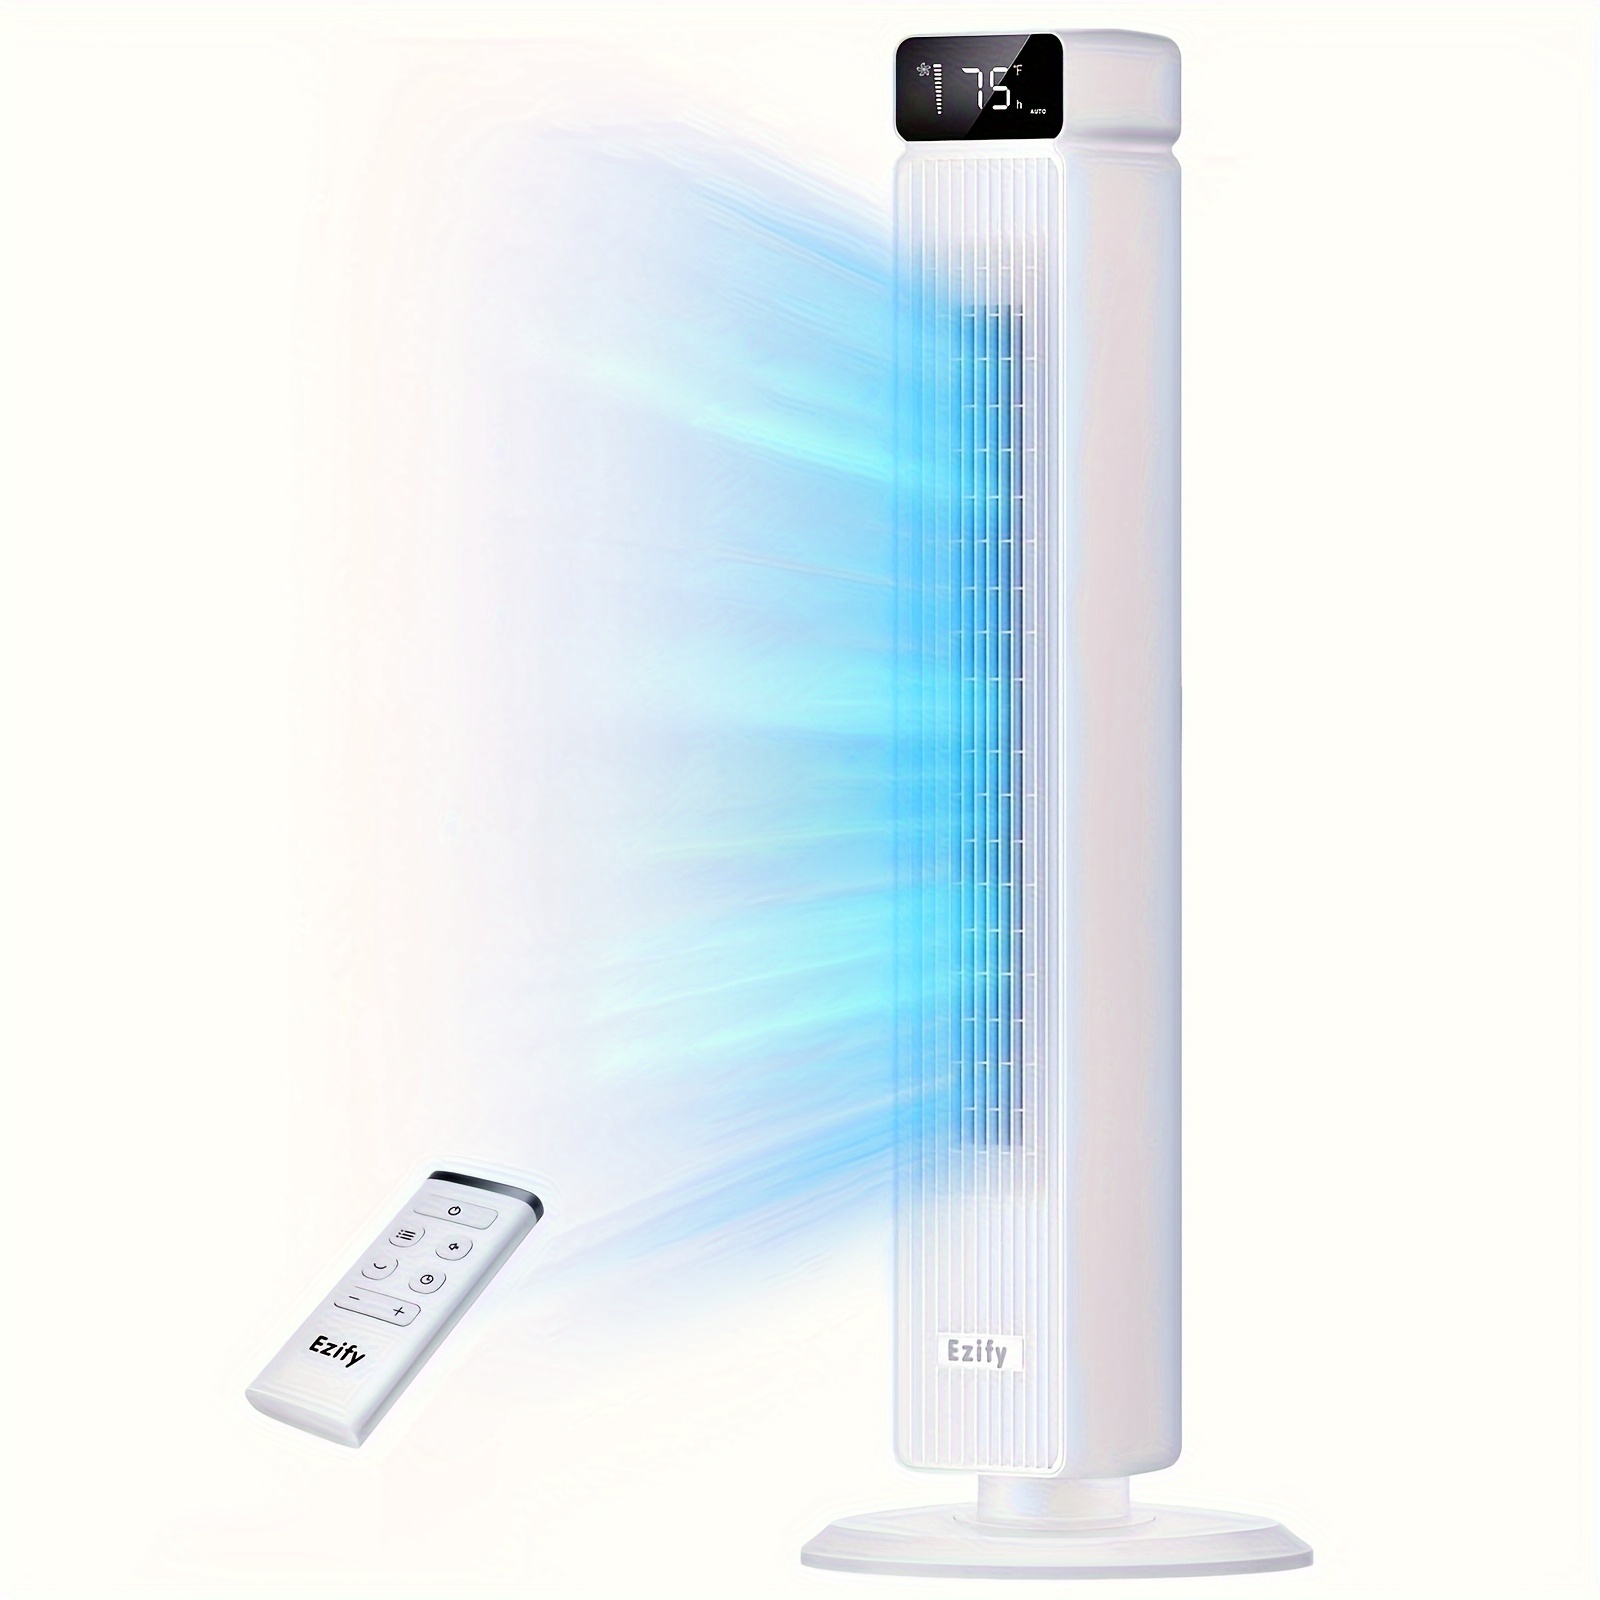 

2024 Tower Fan Bedroom - Robotic Design, Bladeless Fan 24 Ft/s Speed, Quiet Operation, 90° Oscillating Fan For Indoor Use, Standing Fan With 6 Speeds, 4 Modes, 12h Timer, Remote Control, White